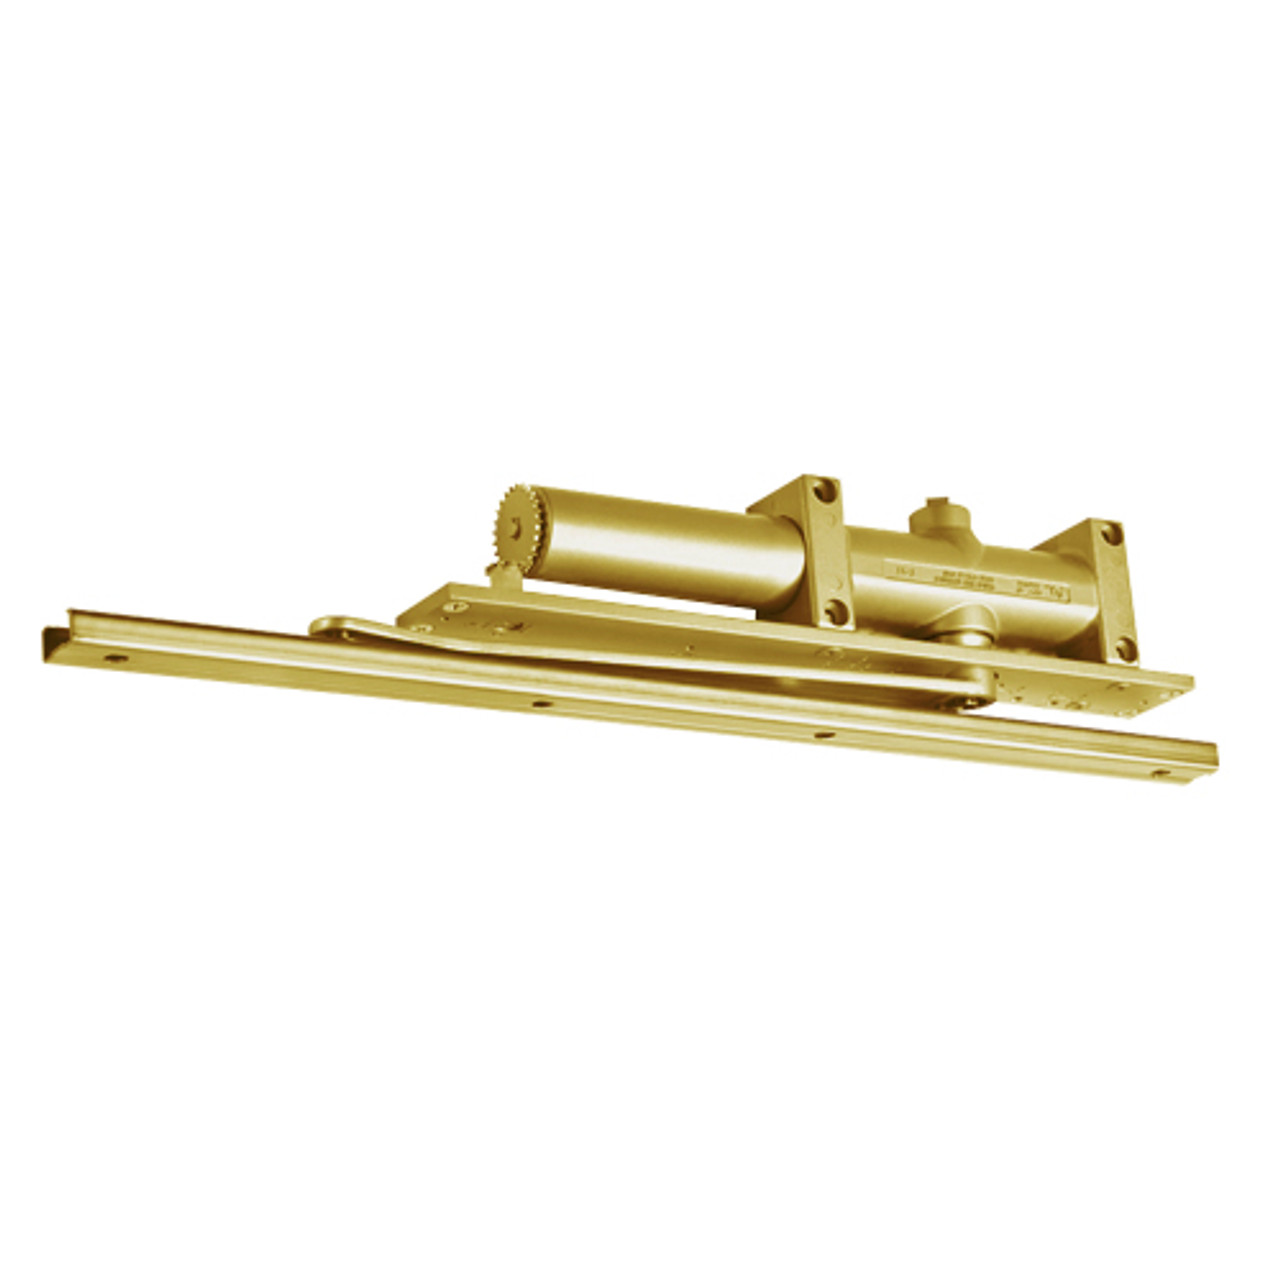 7974-696-LH Norton 7900 Series Non-Hold Open Overhead Concealed Security Closers with Spring Size 4 in Gold Finish